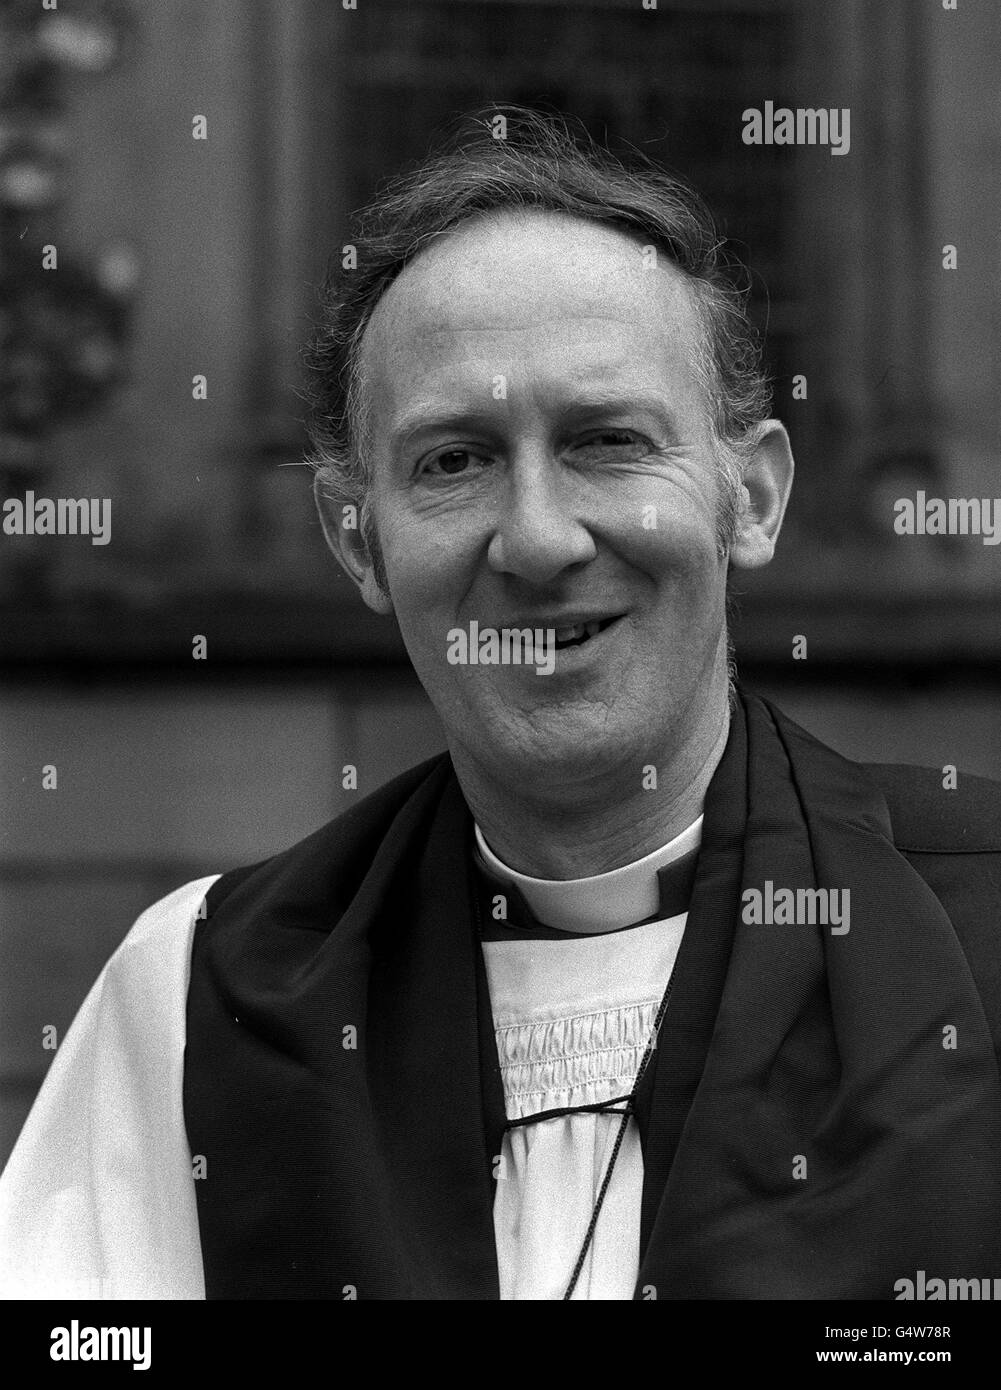 Rt. Rev. Michael Scott-Joynt, Bishop of Winchester. 8/1/02: Scott-Joynt is a possible candidate to succeed Dr George Carey, who announced his retirement as Archbishop of Canterbury. Stock Photo